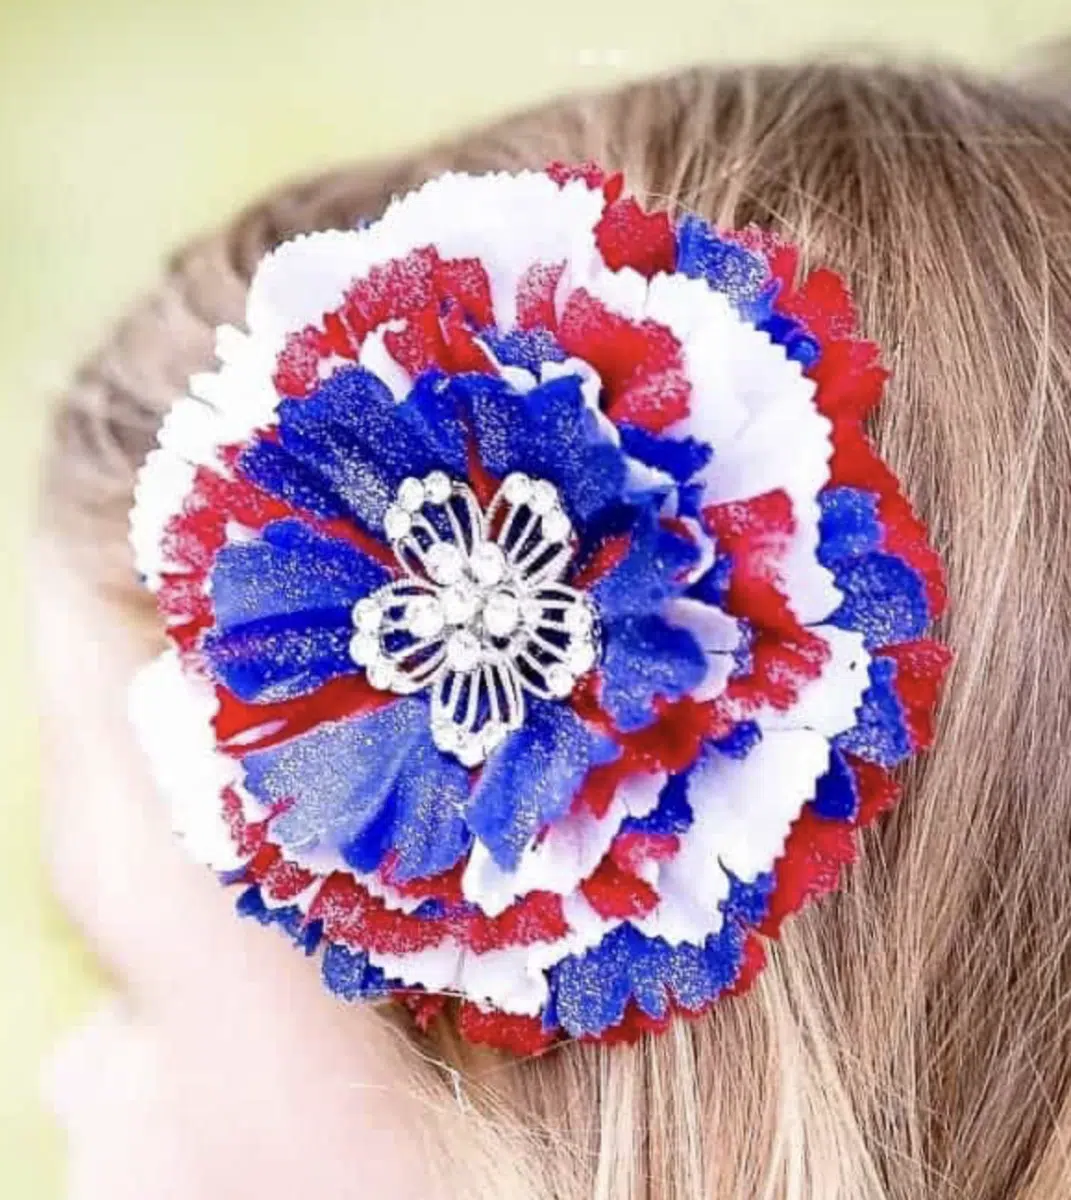 A red, white, and blue artificial flower hair accessory, perfect for Fourth of July crafts, attached to a person's hair.